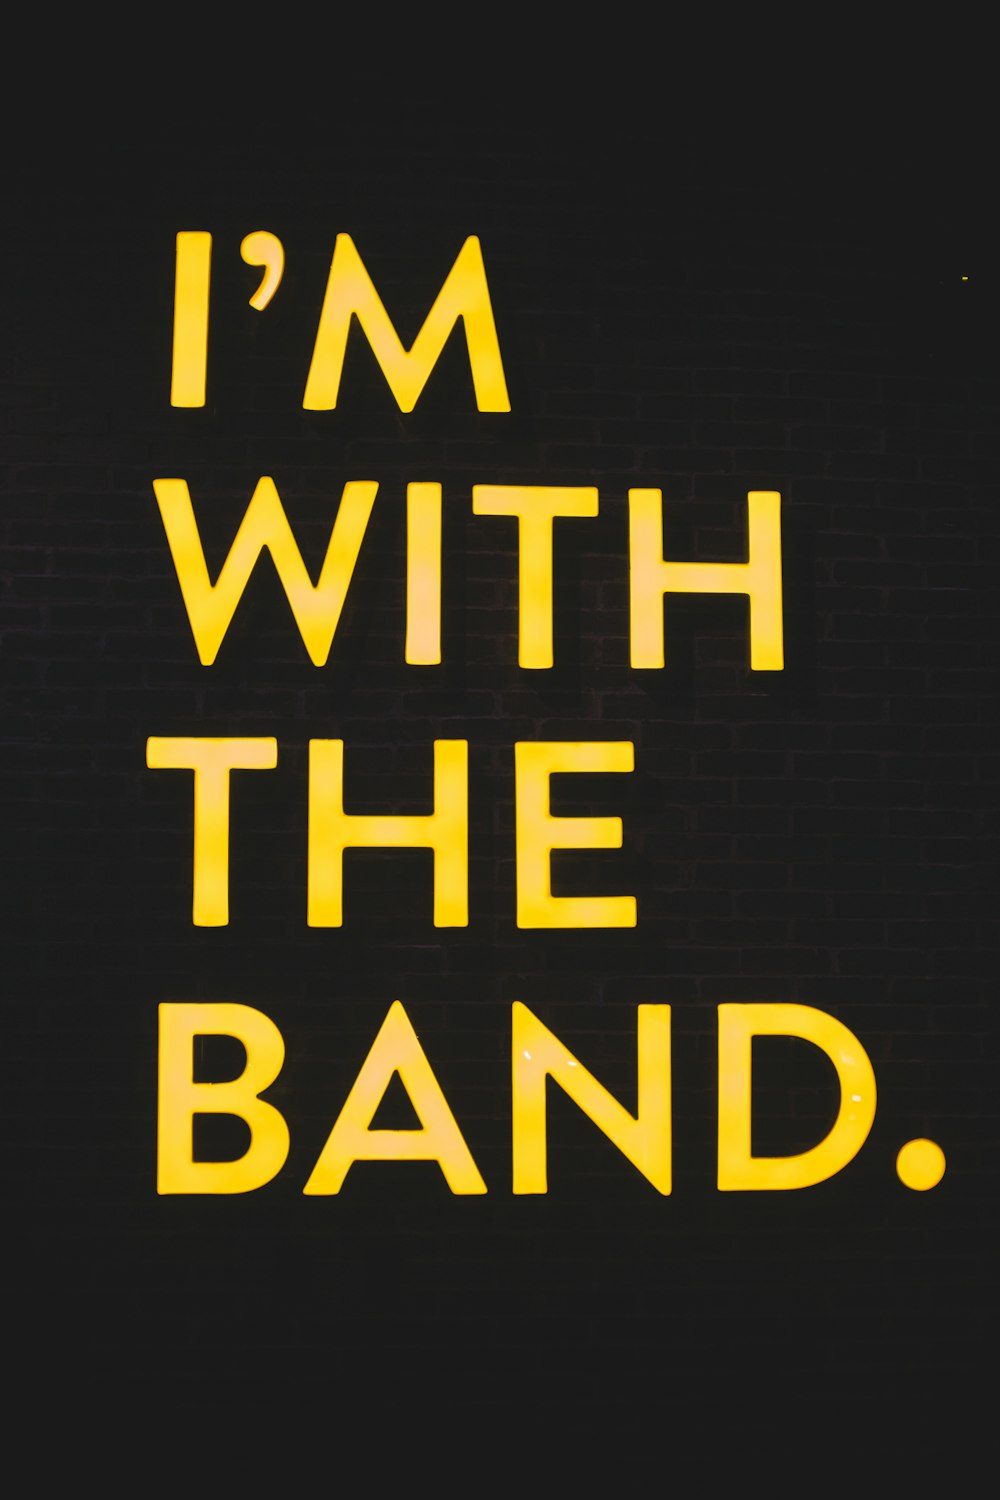 I'm with the band text